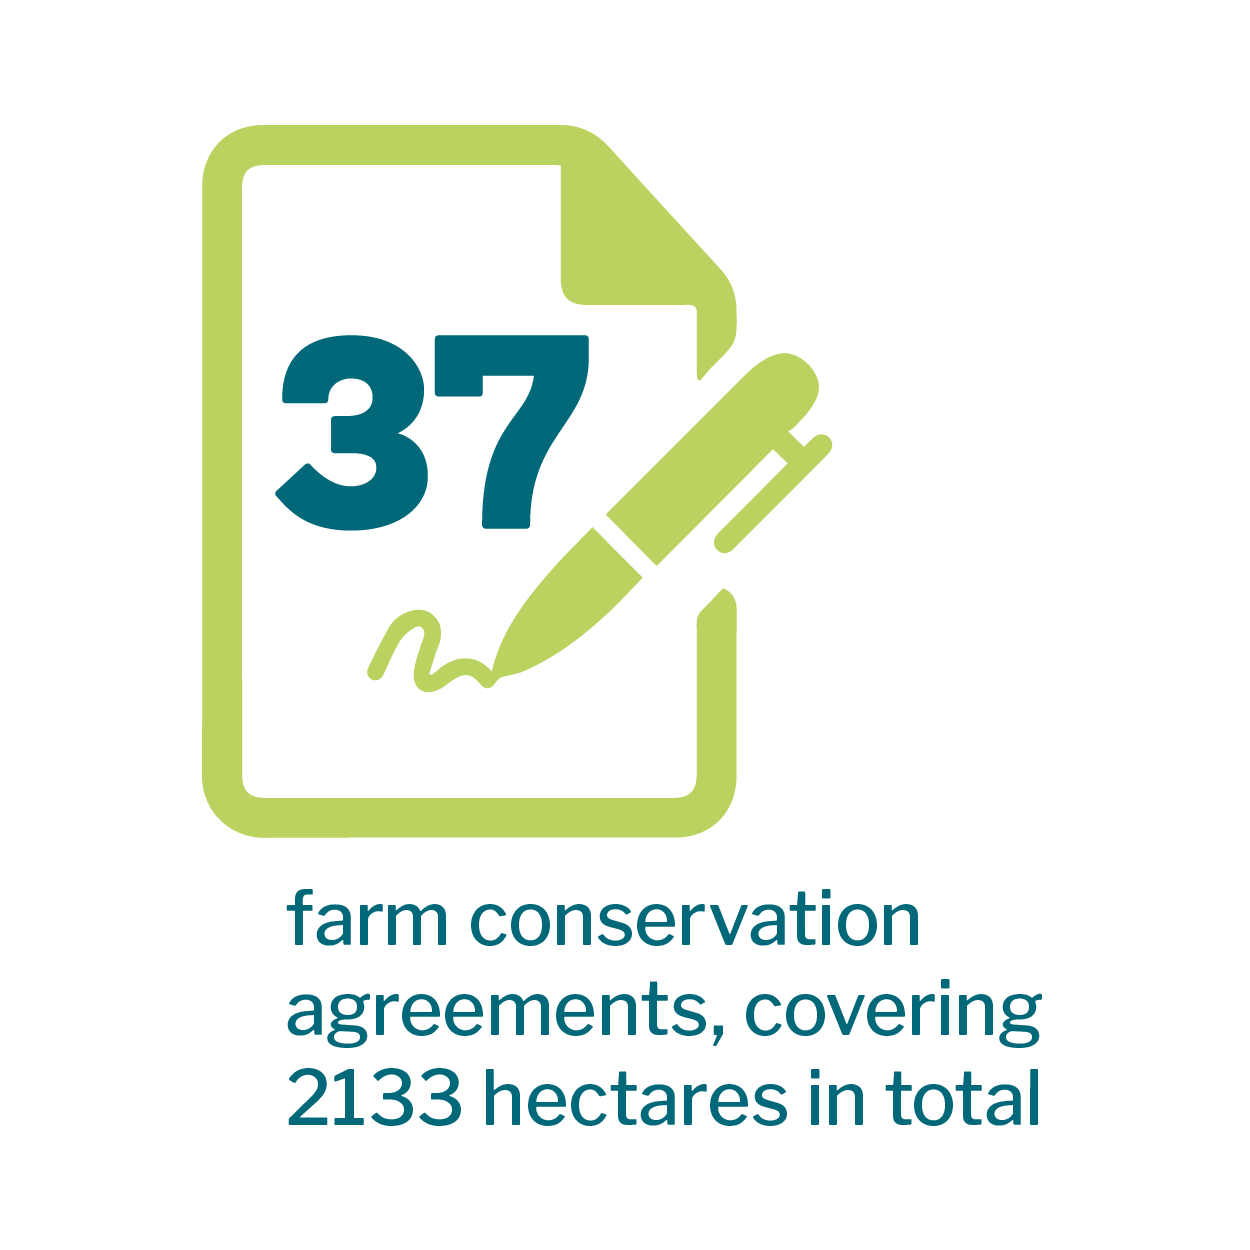 Pen writing on document icon that reads: *37 farm conservation agreements, covering 2133 hectares in total.